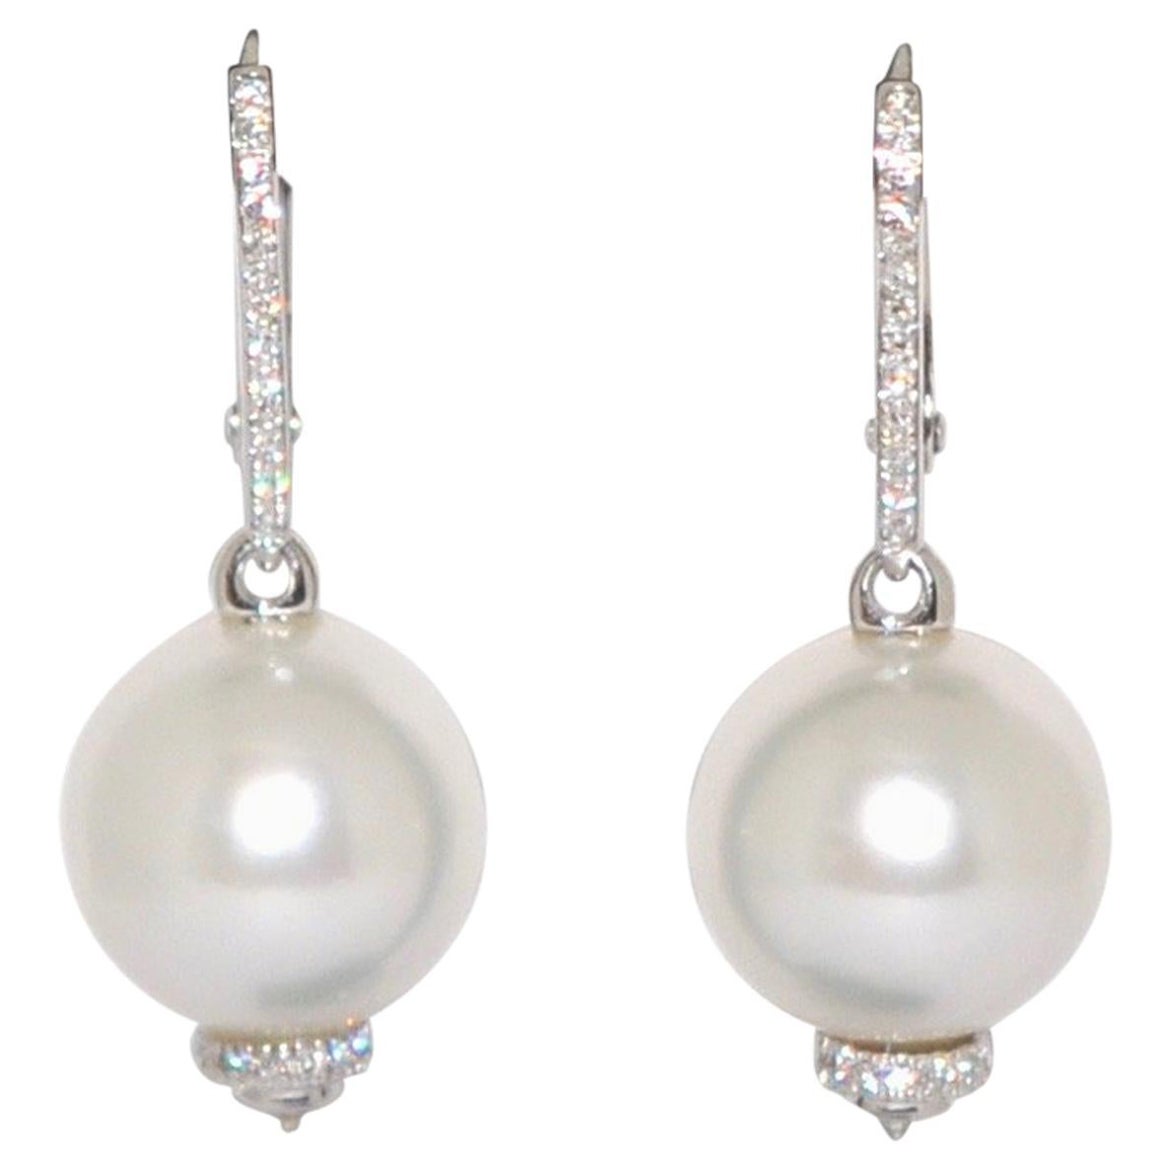 South Sea Pearls and White Diamonds on White Gold 18 Karat Chandelier Earrings For Sale